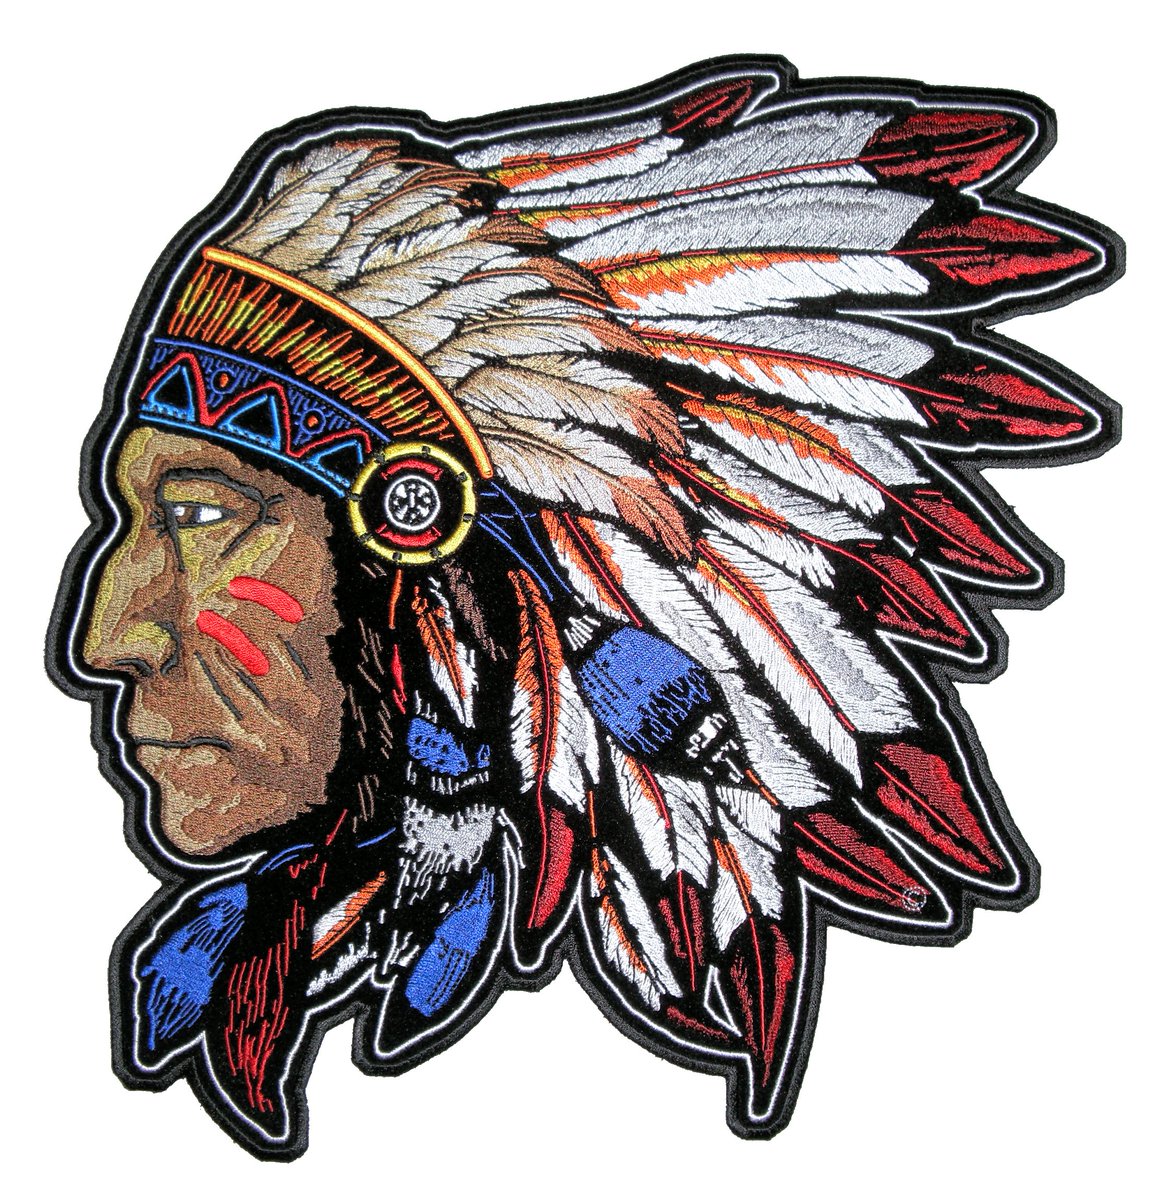 Cool #NativeAmerican #Chief #EmbroideredPatch in 2 sizes
qualitybikerpatches.com/product/native…